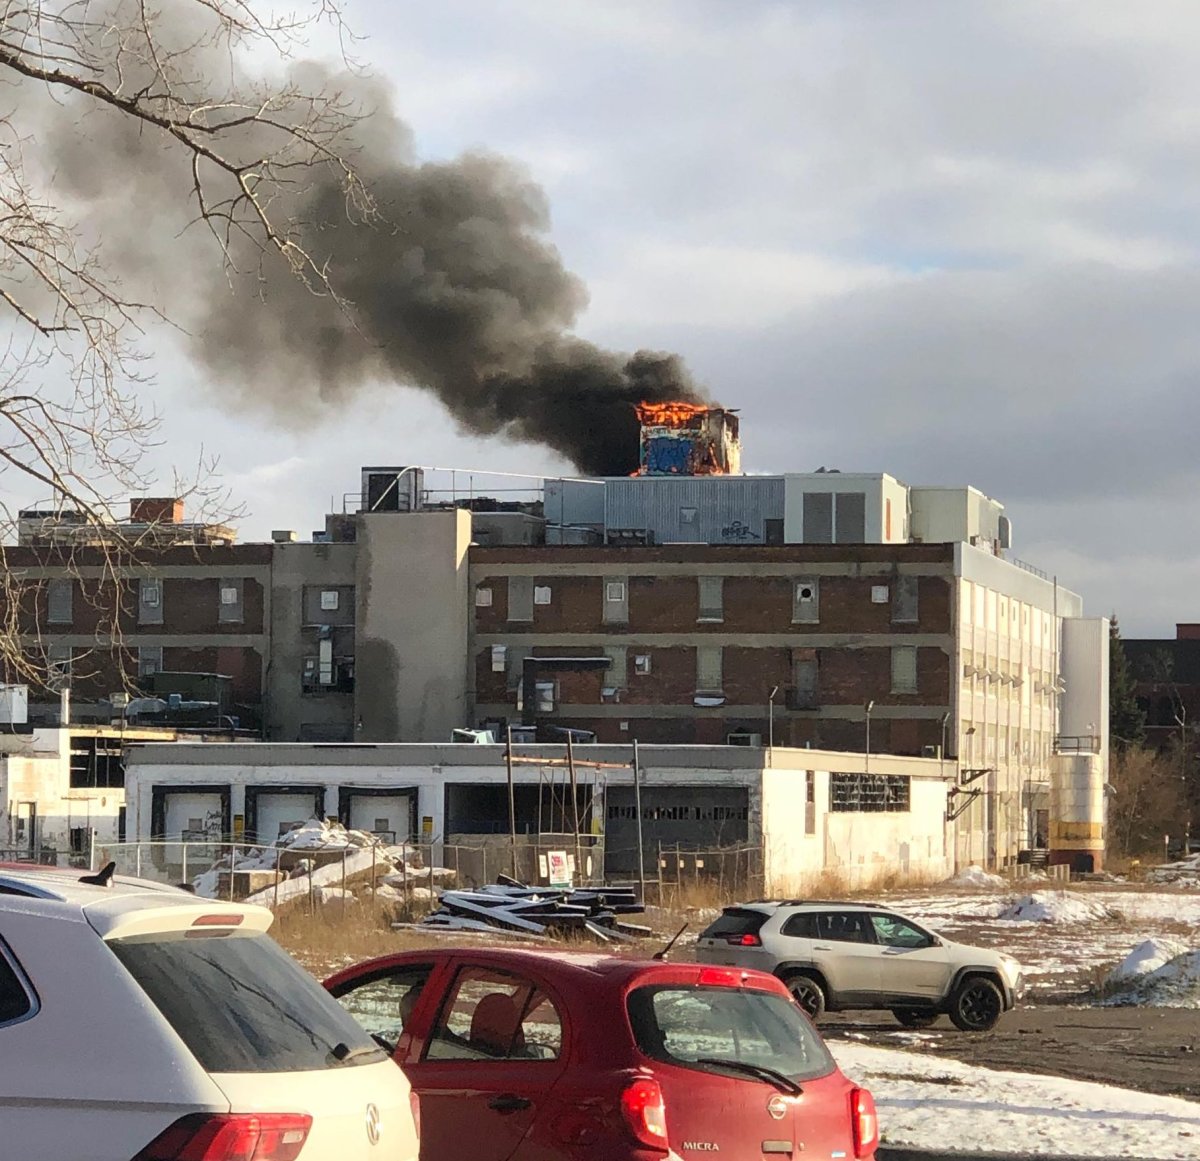 Flames and heavy smoke can be seen coming from the roof of the former McCormick-Beta Brands factory in east London, Nov. 20, 2018.